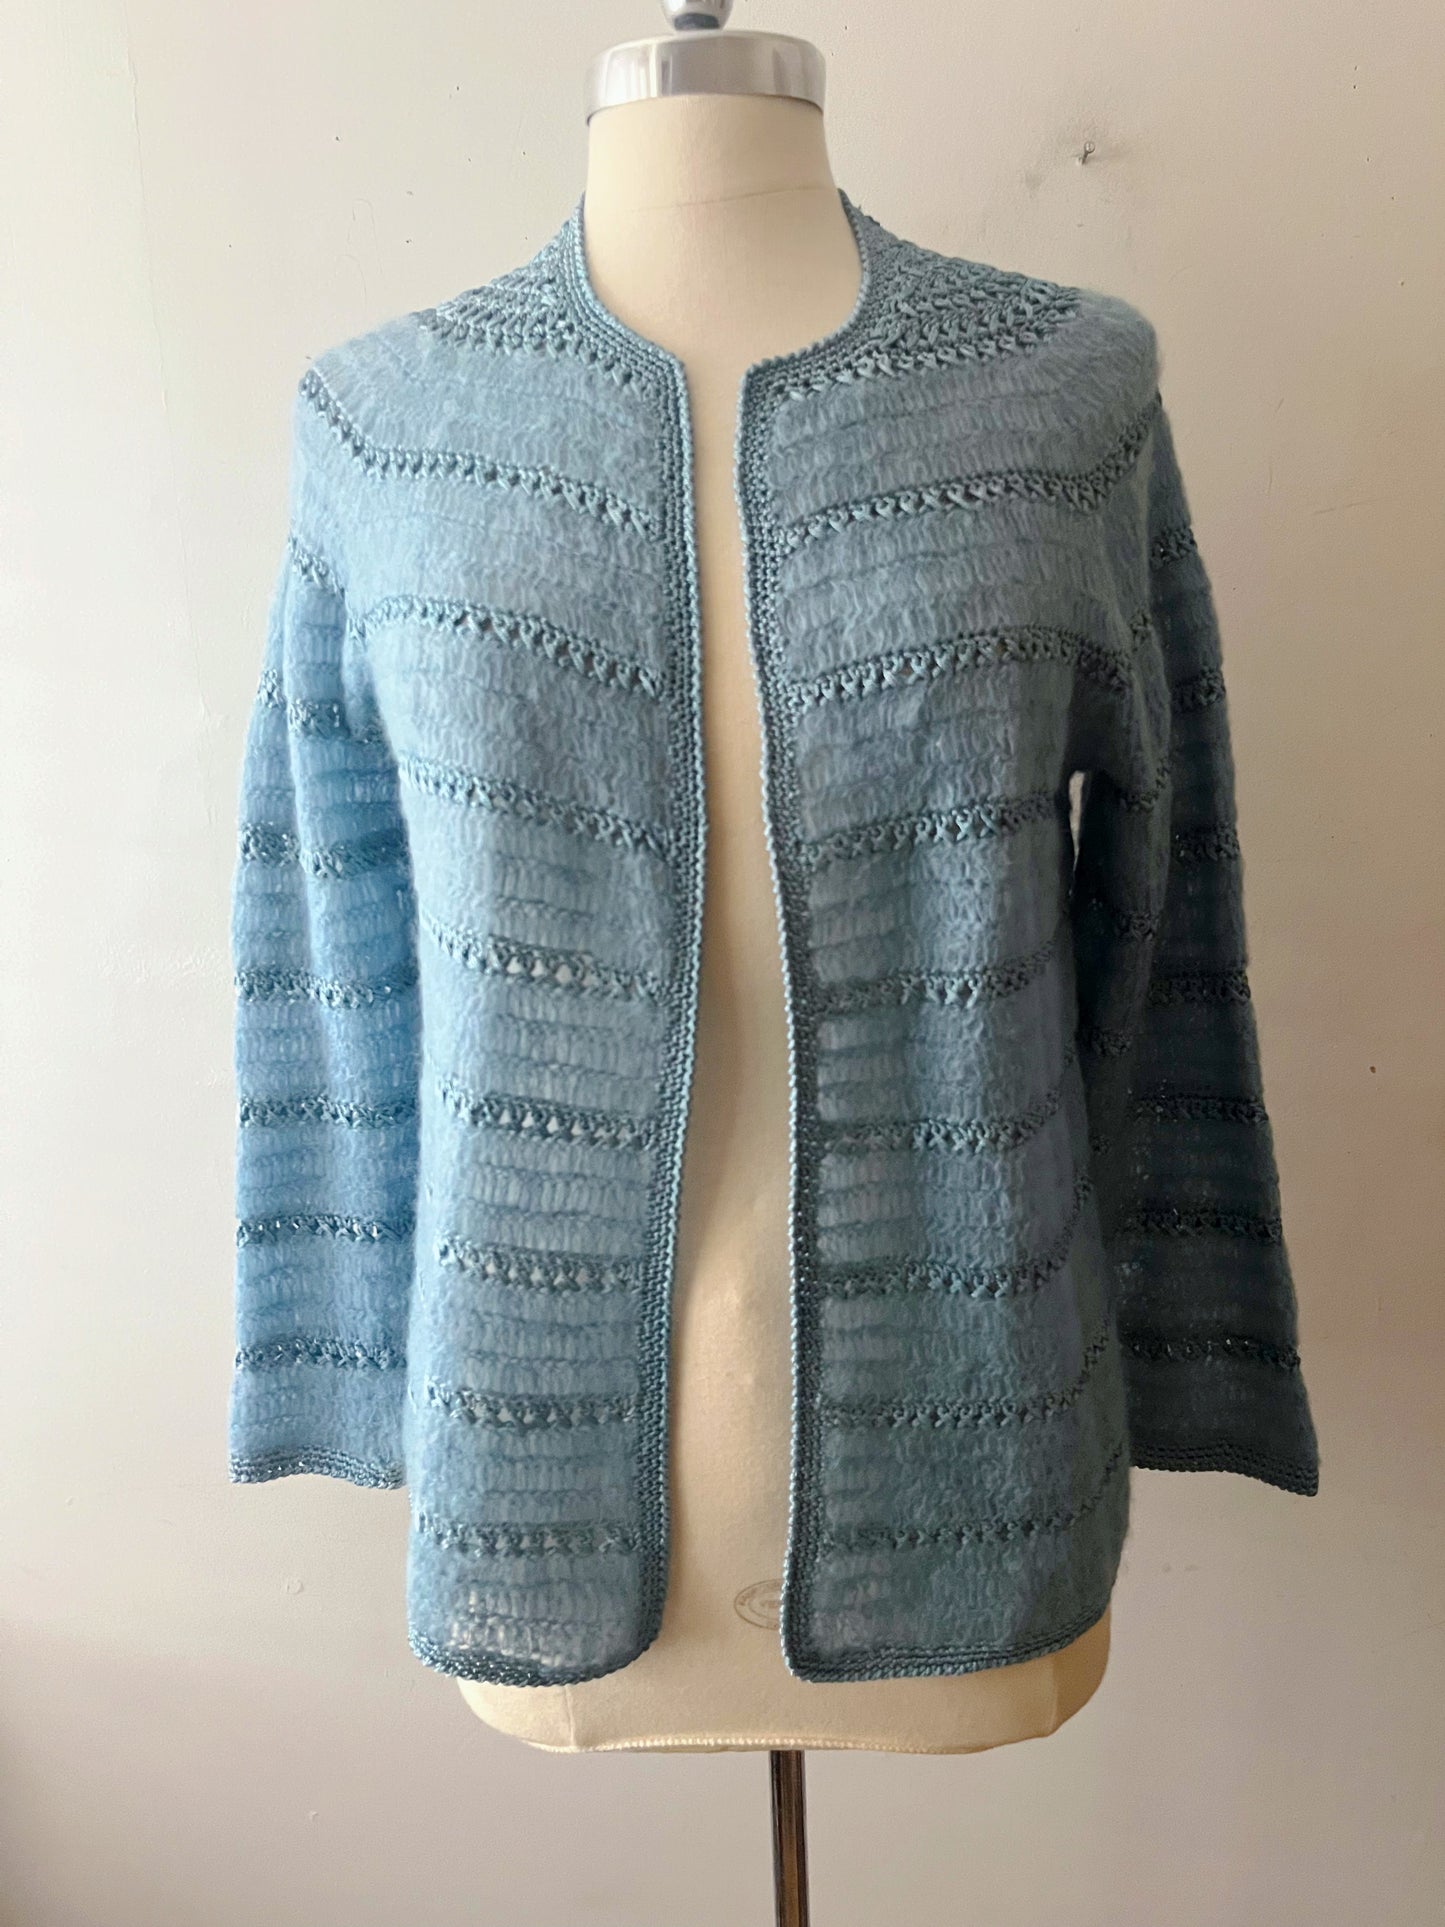 Crocheted Mohair Knit Sweater